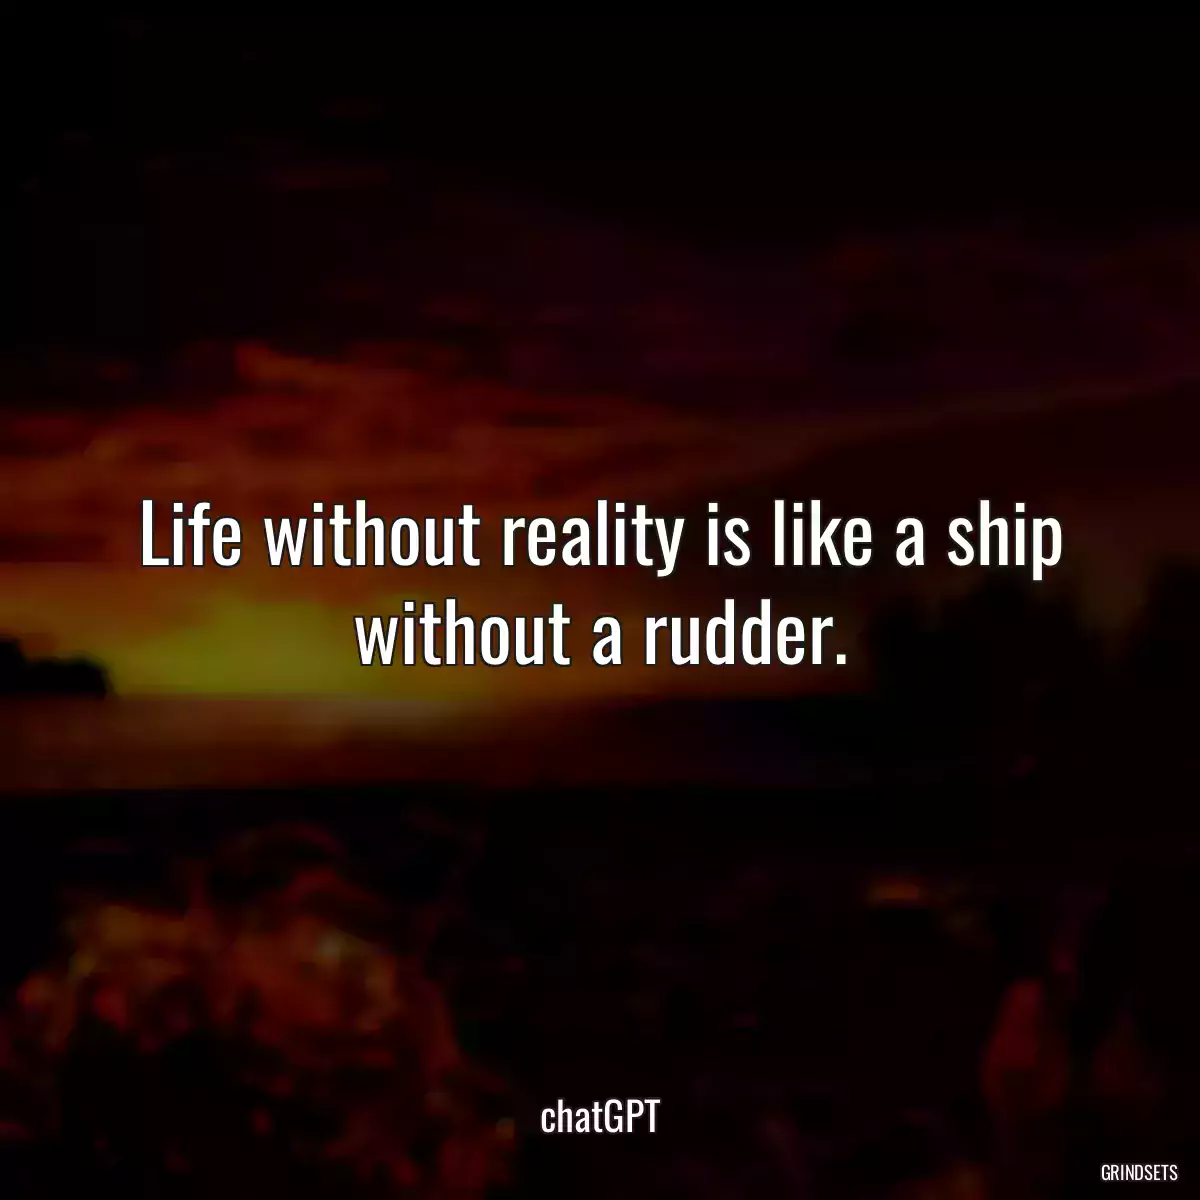 Life without reality is like a ship without a rudder.